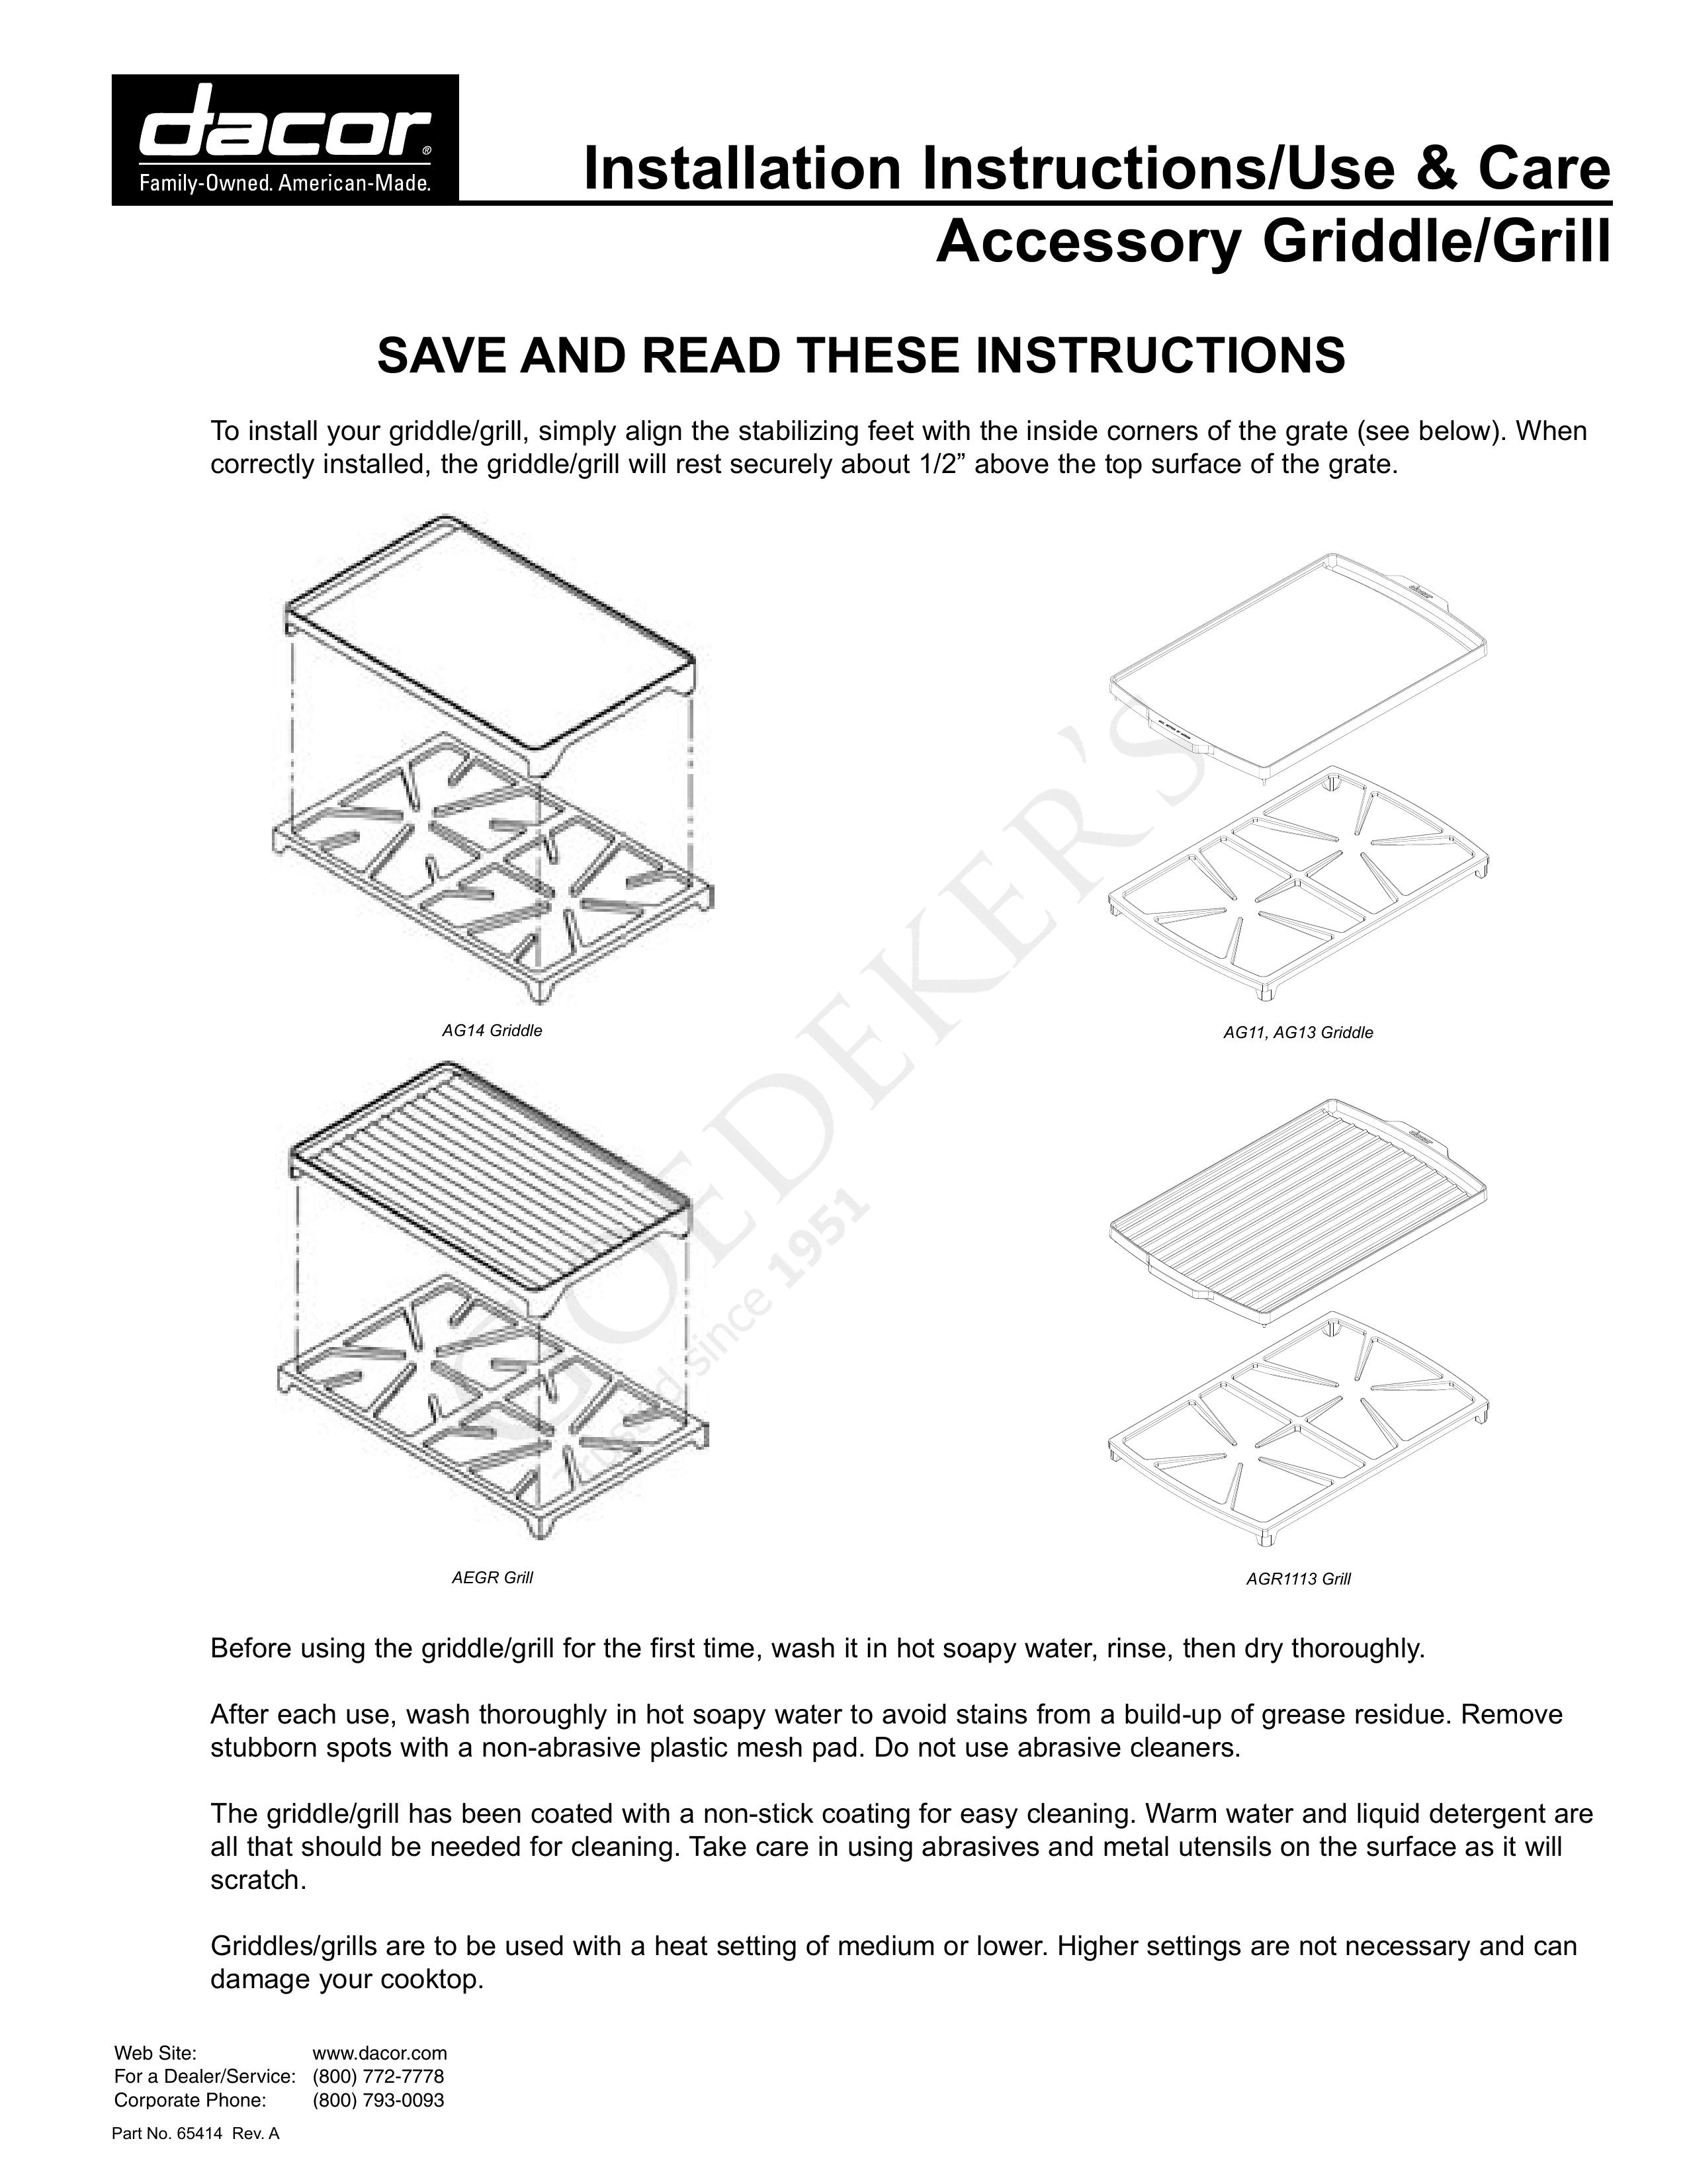 Dacor AGR1113 Grill Accessory User Manual